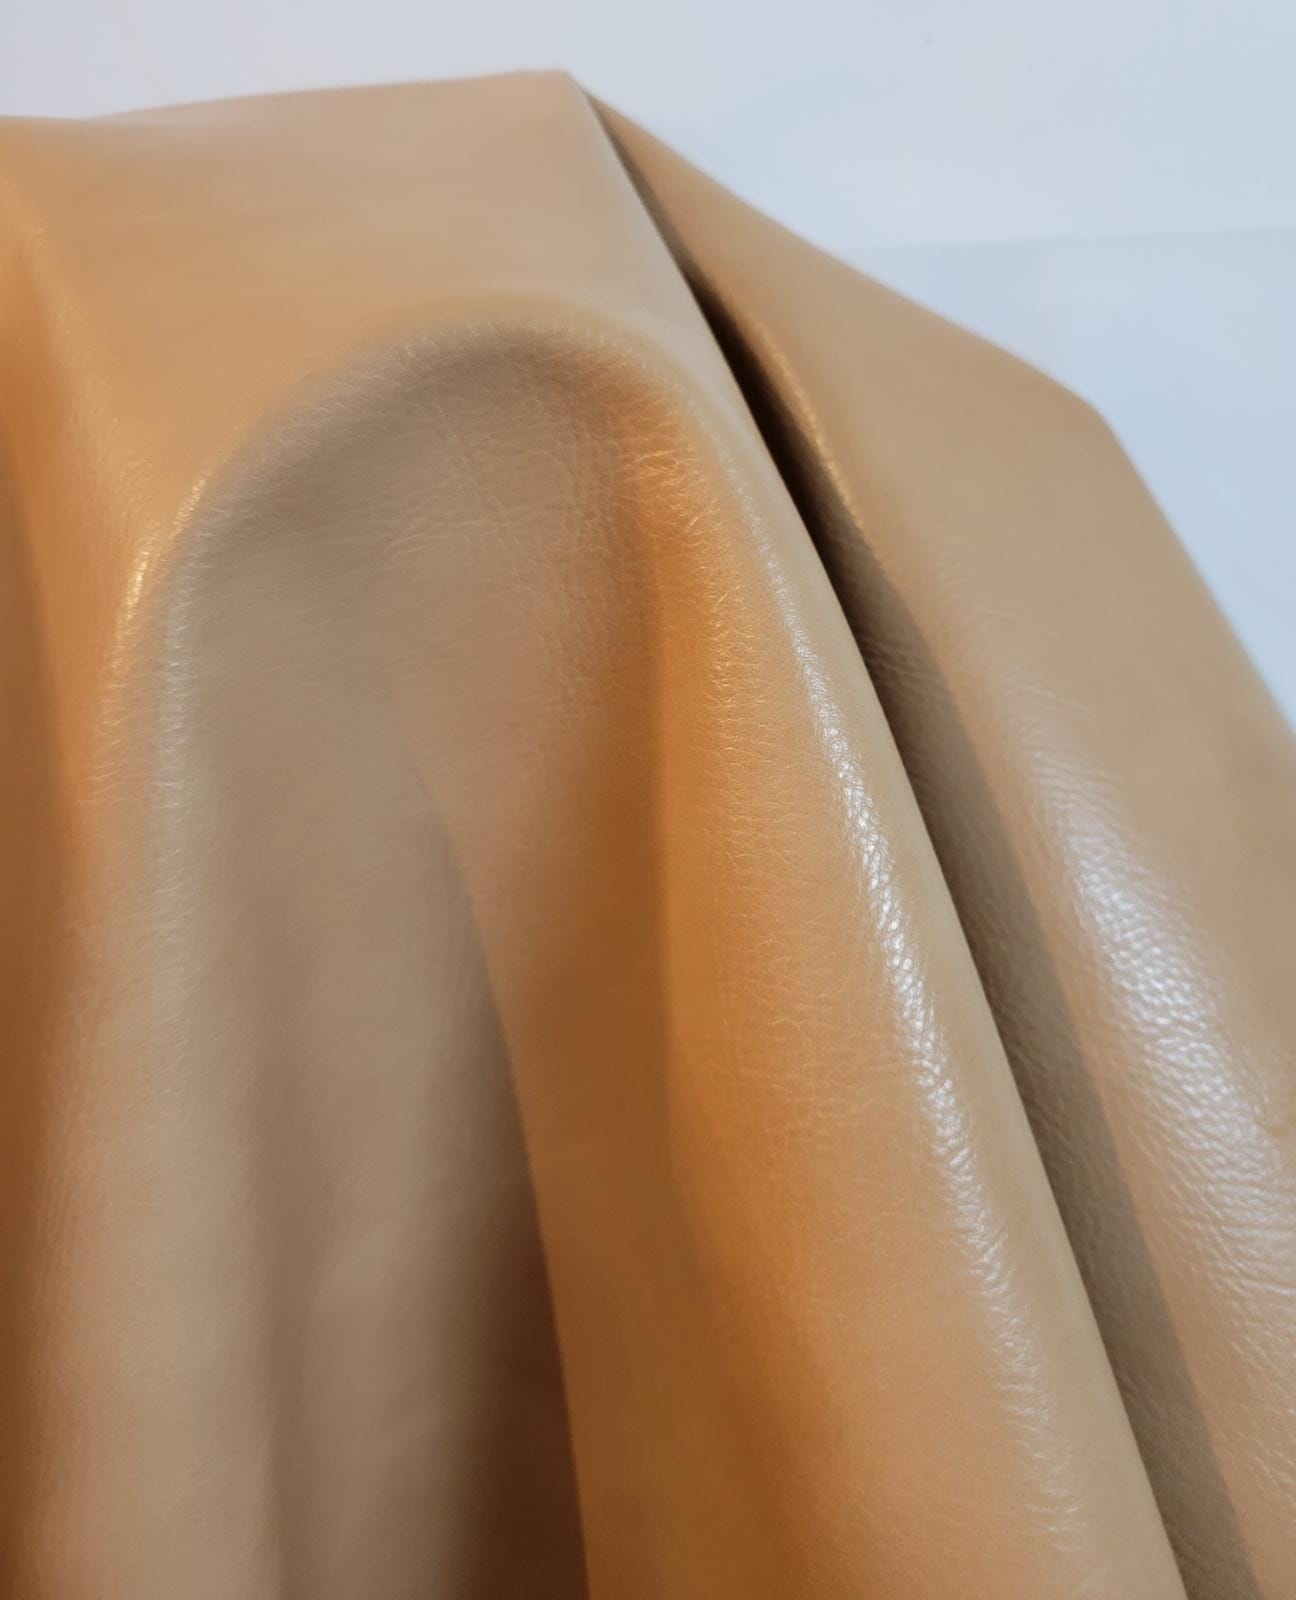  Faux vegan leather by the yard sheets distressed leather fabric for upholstery 30,000 Double Rubs vinyl sheets nappa leather crafts bookbinding books furniture fabrics uphilstery fuax material pu pleather faiux learher cruelty free nappa seat wheat pebblegrain